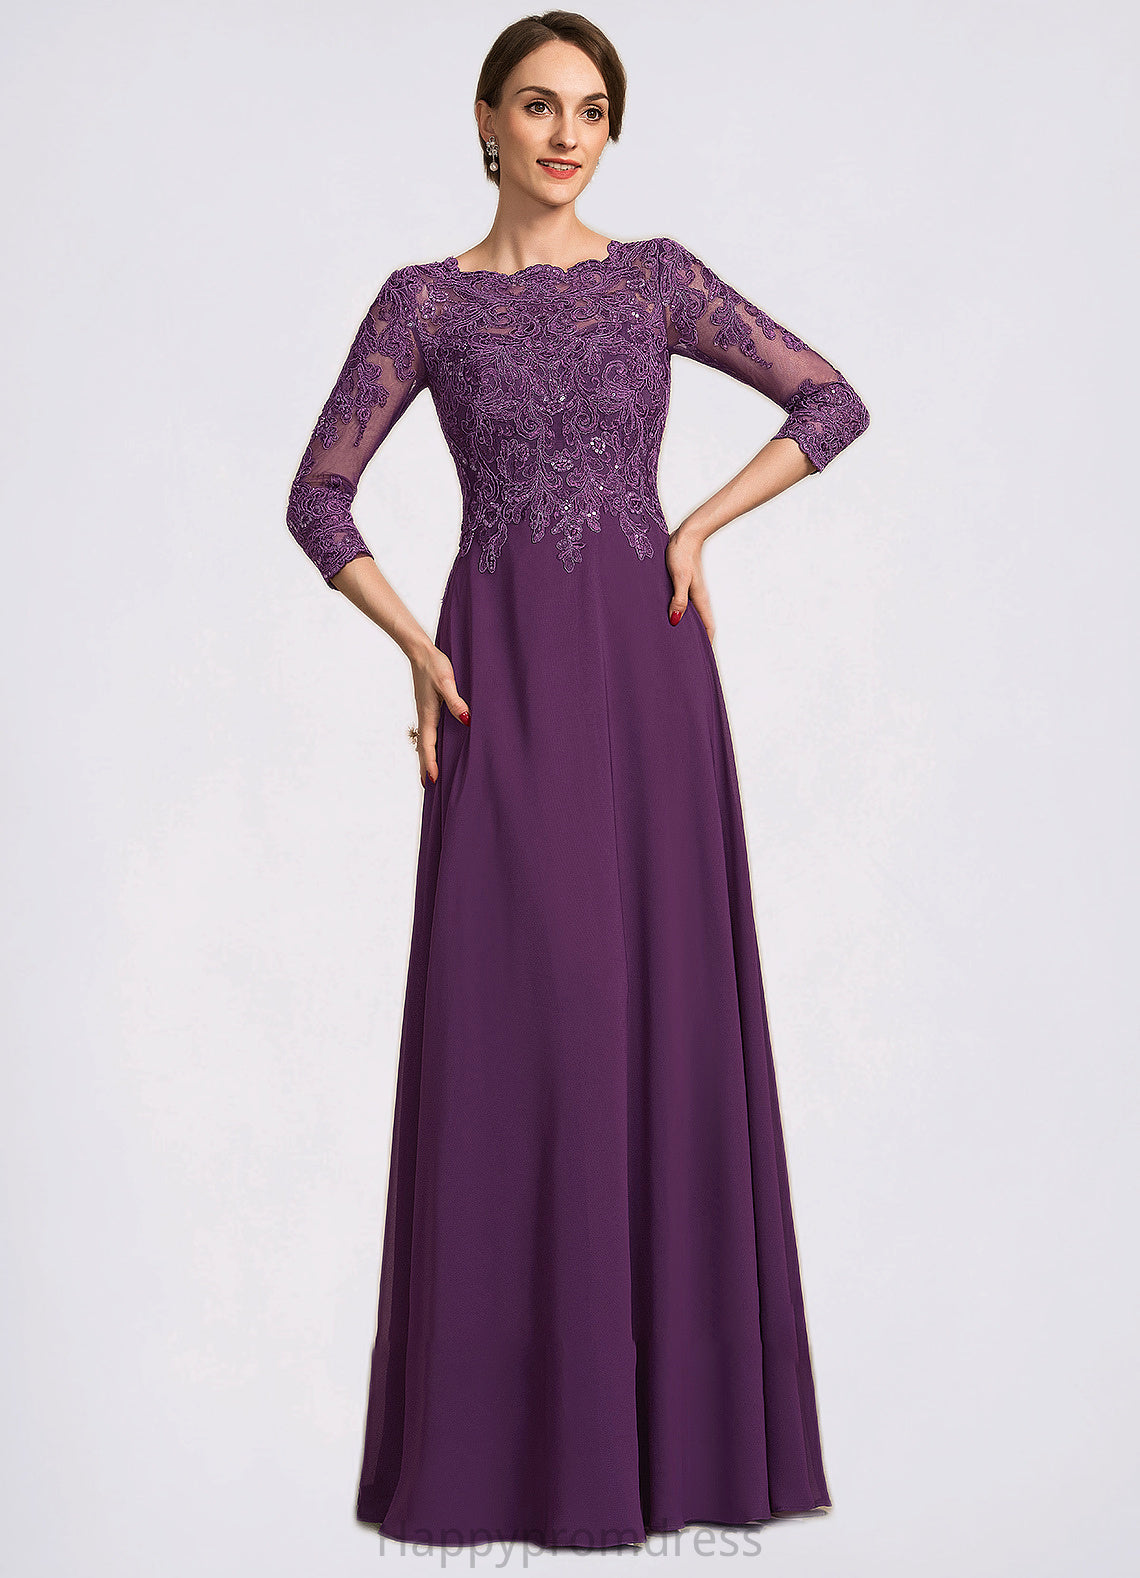 Lilyana A-Line Scoop Neck Floor-Length Chiffon Lace Mother of the Bride Dress With Sequins XXS126P0014590